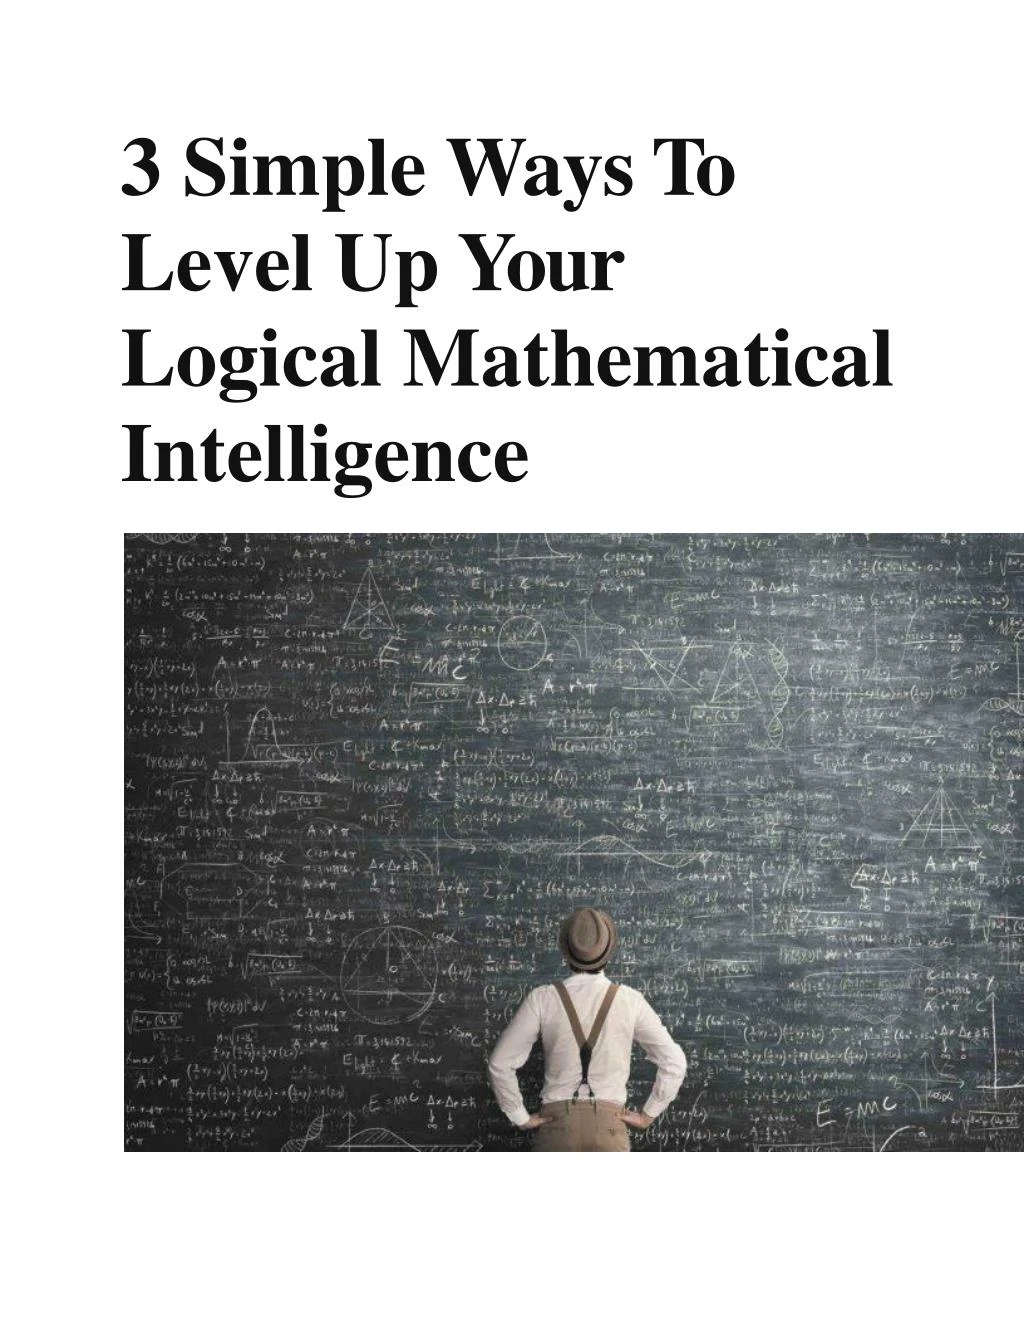 3 simple ways to level up your logical